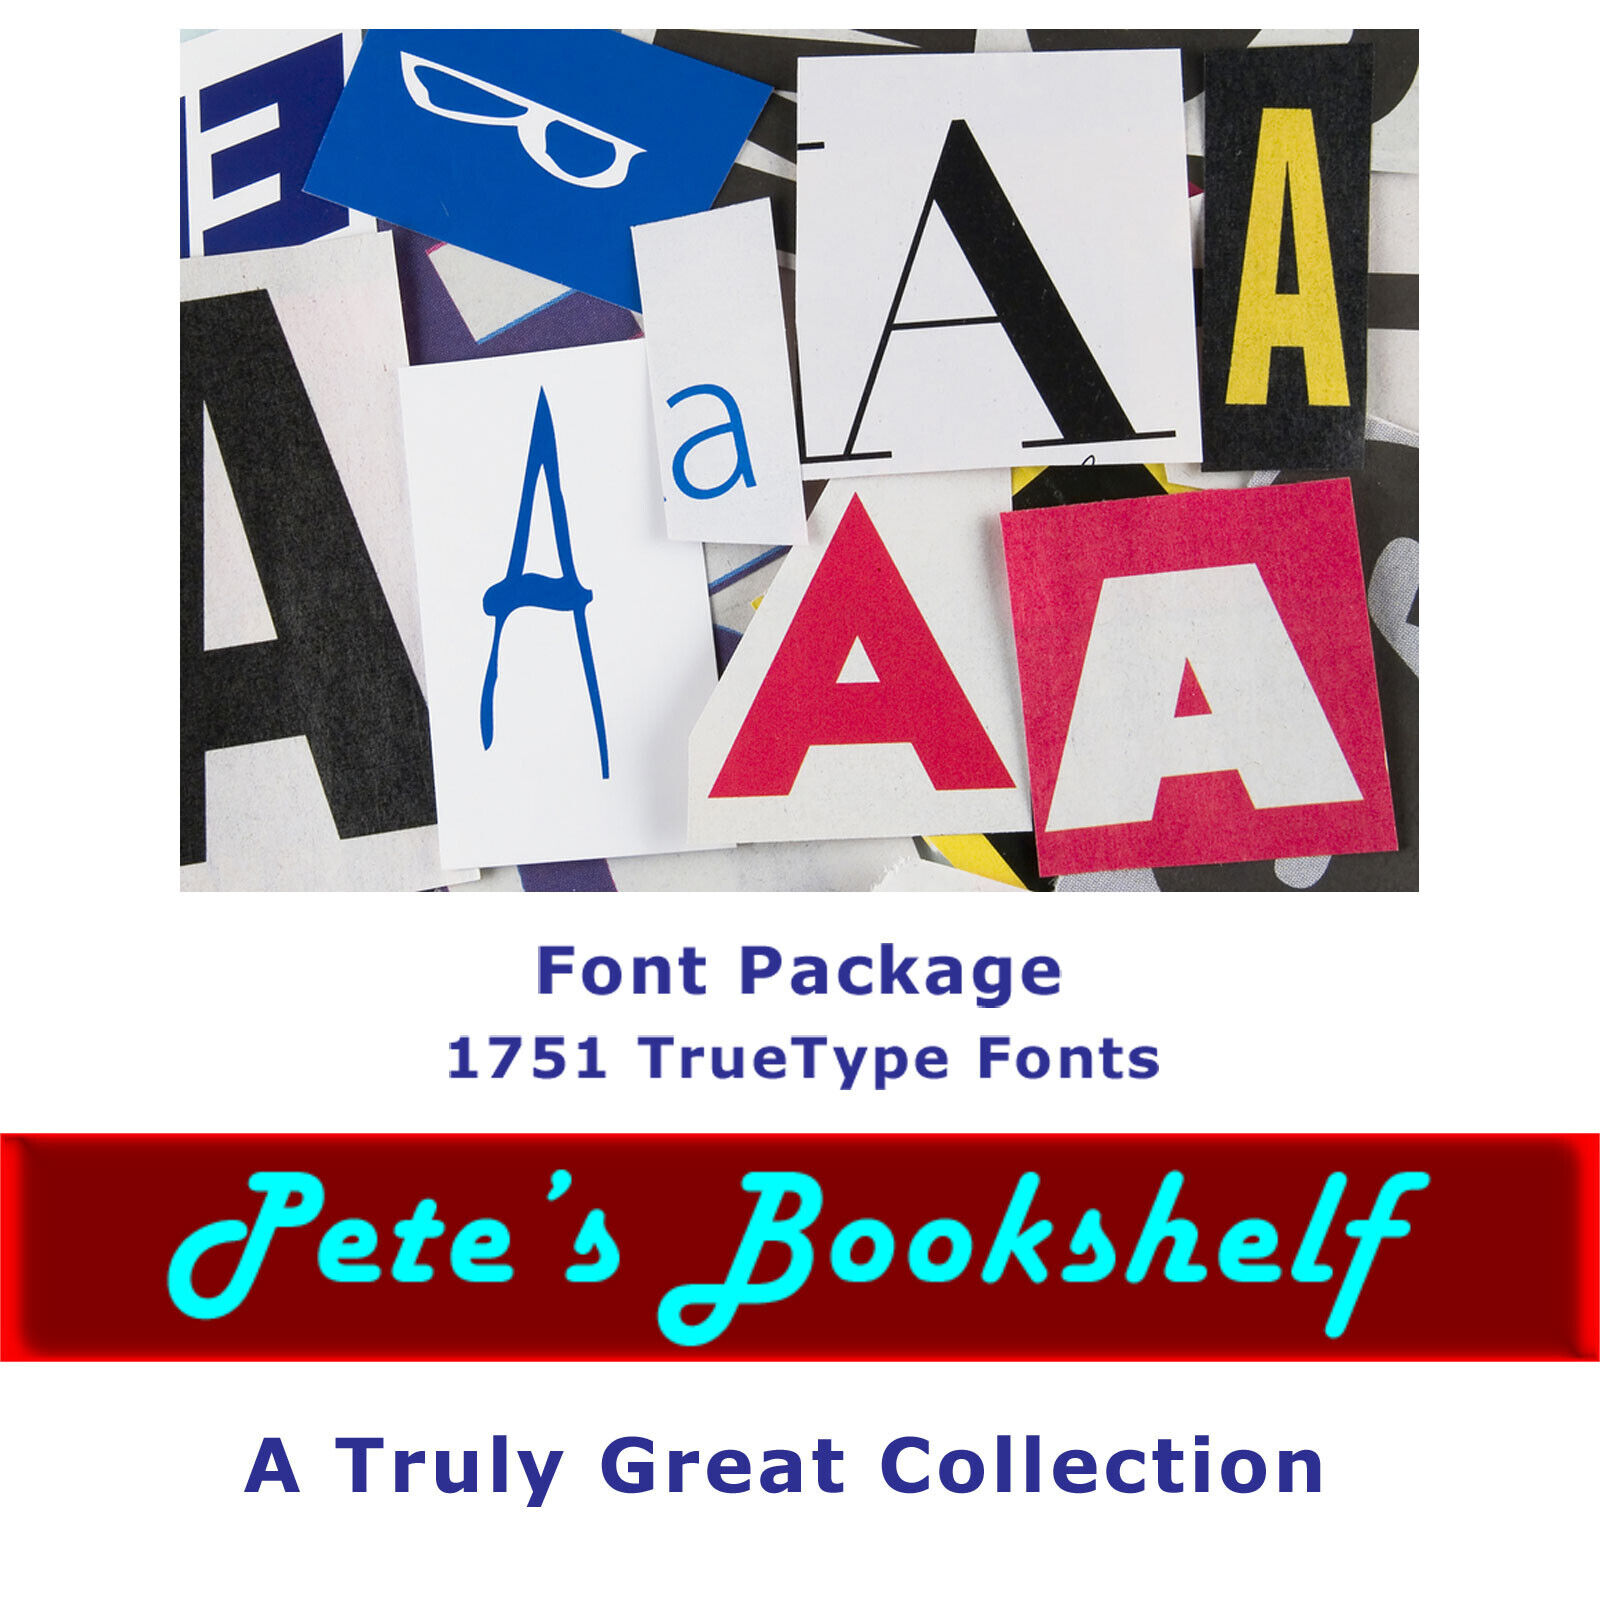 Font Package - 1751 TrueType Fonts - CD - Great Fonts